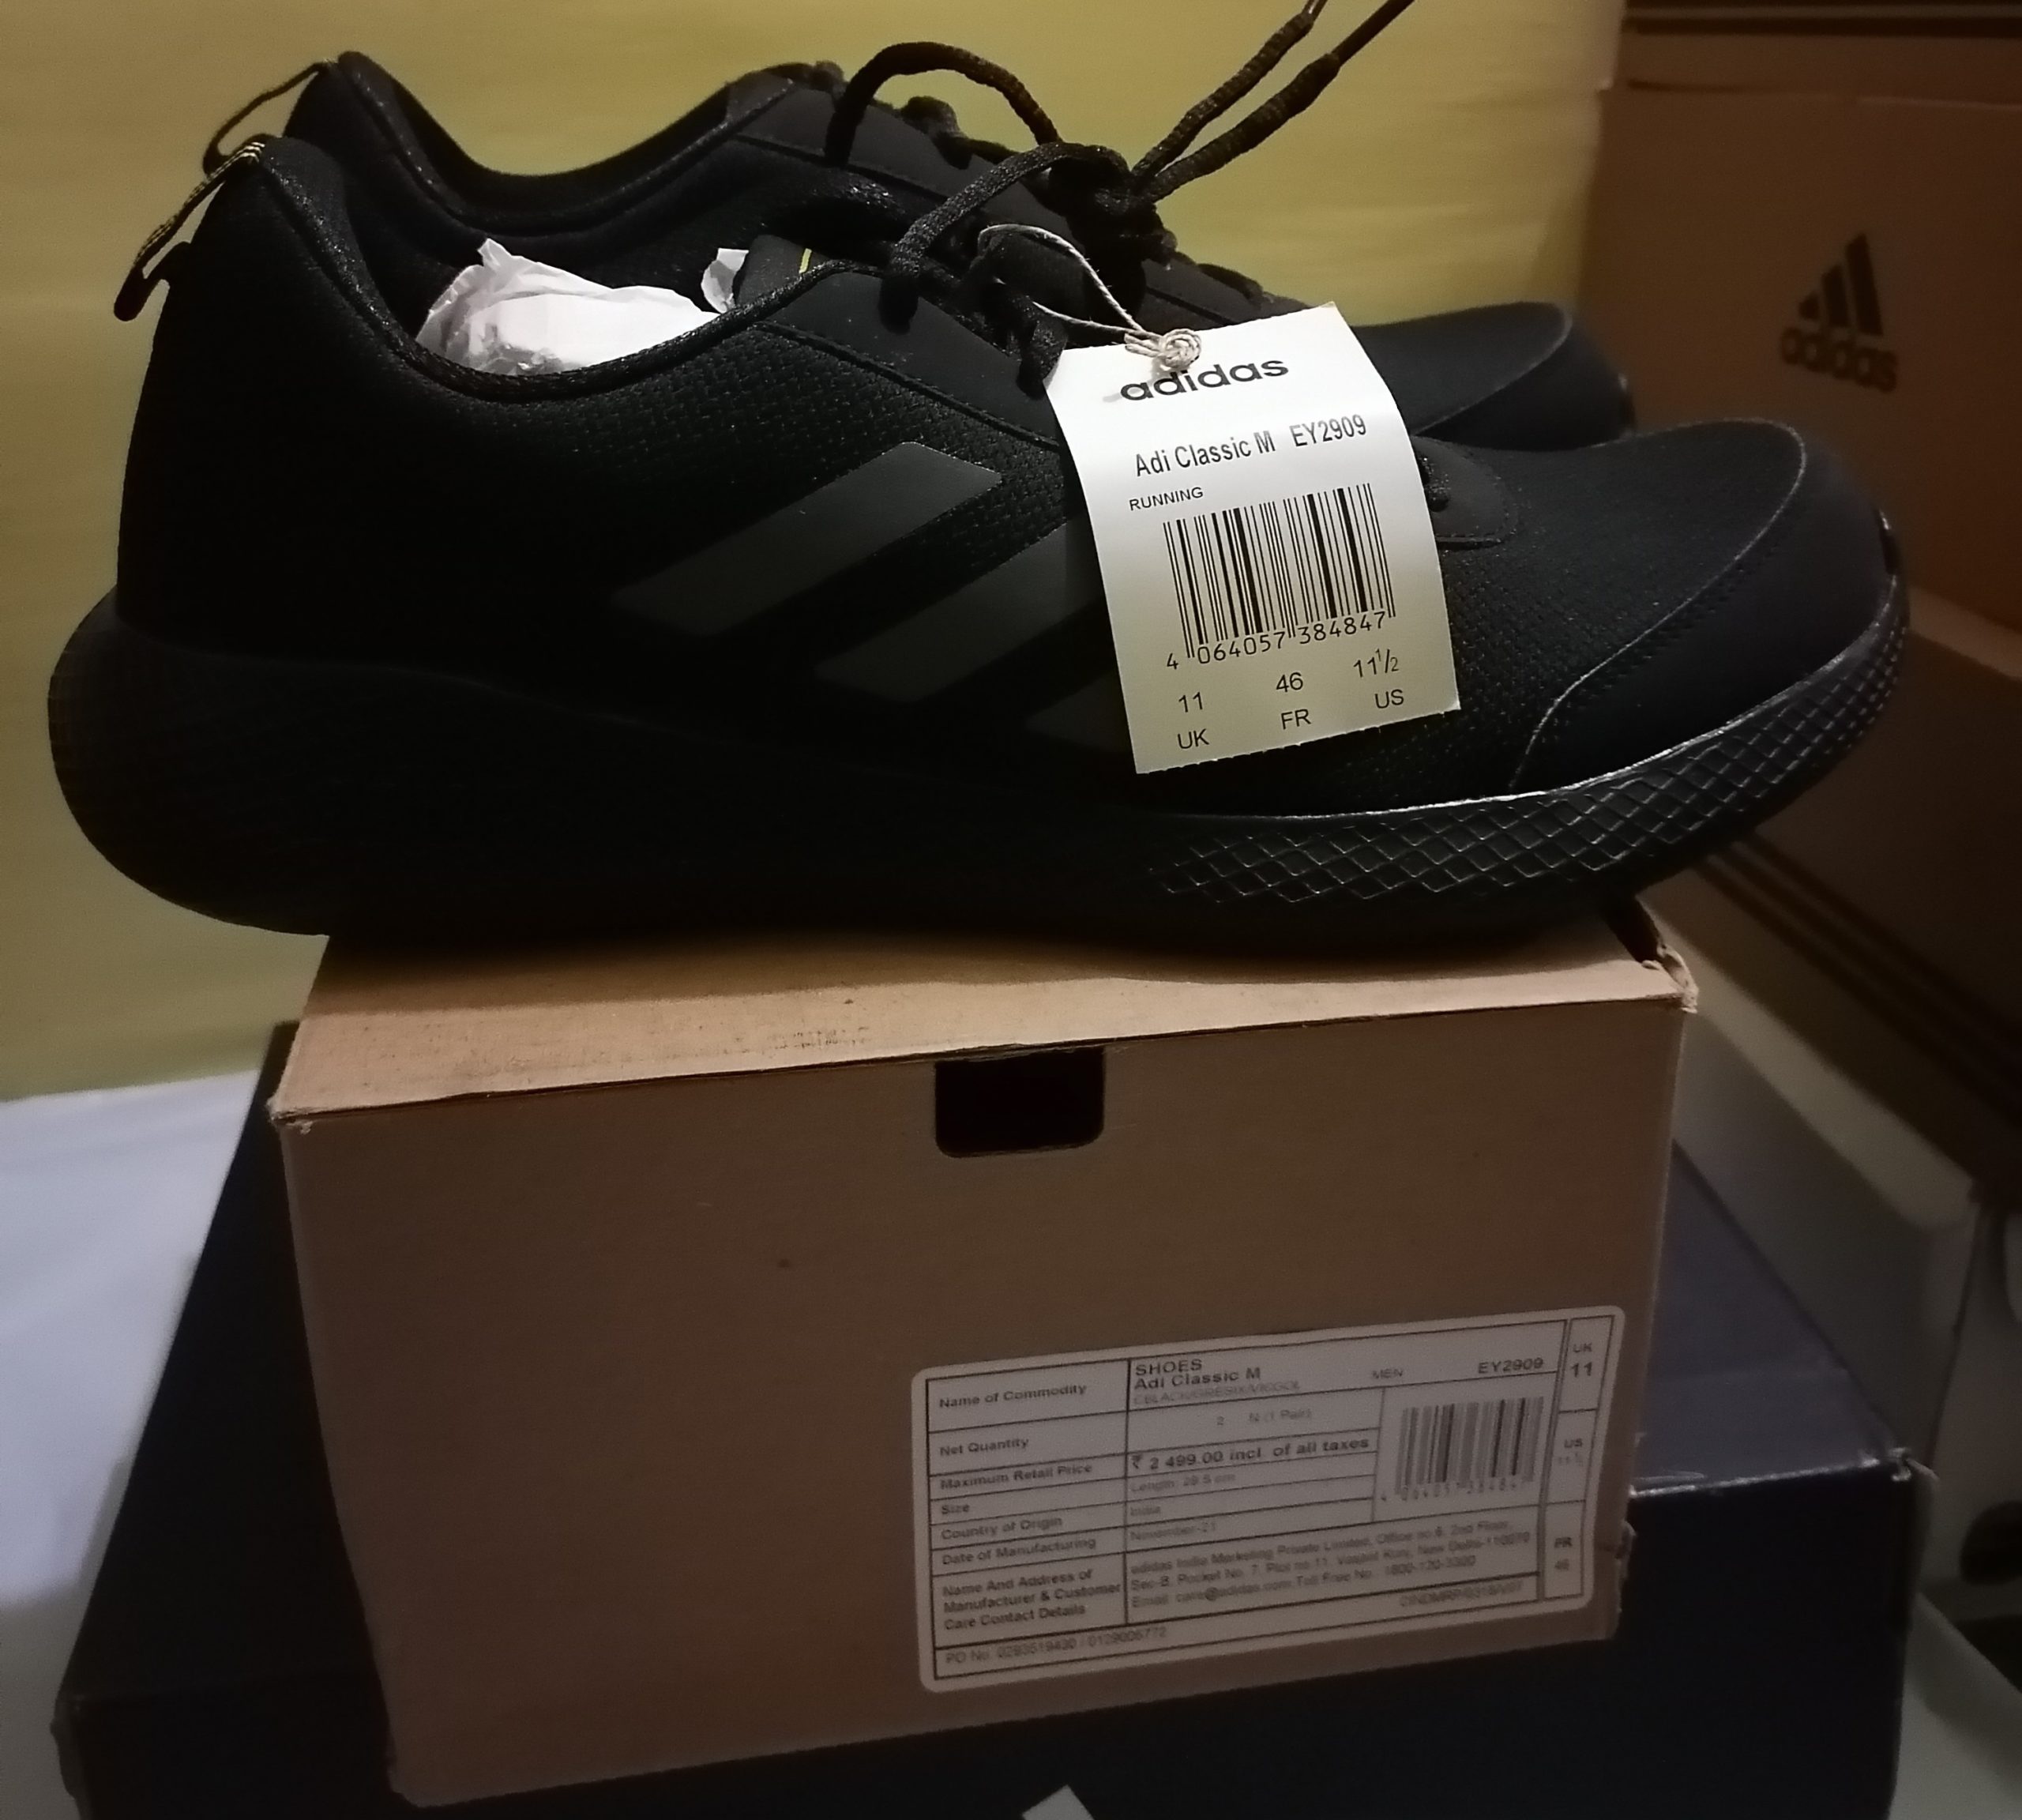 New Superstar Adidas Fashion Sneakers Size 9 Athletic Shoes Tennis Sho -  clothing & accessories - by owner - apparel...